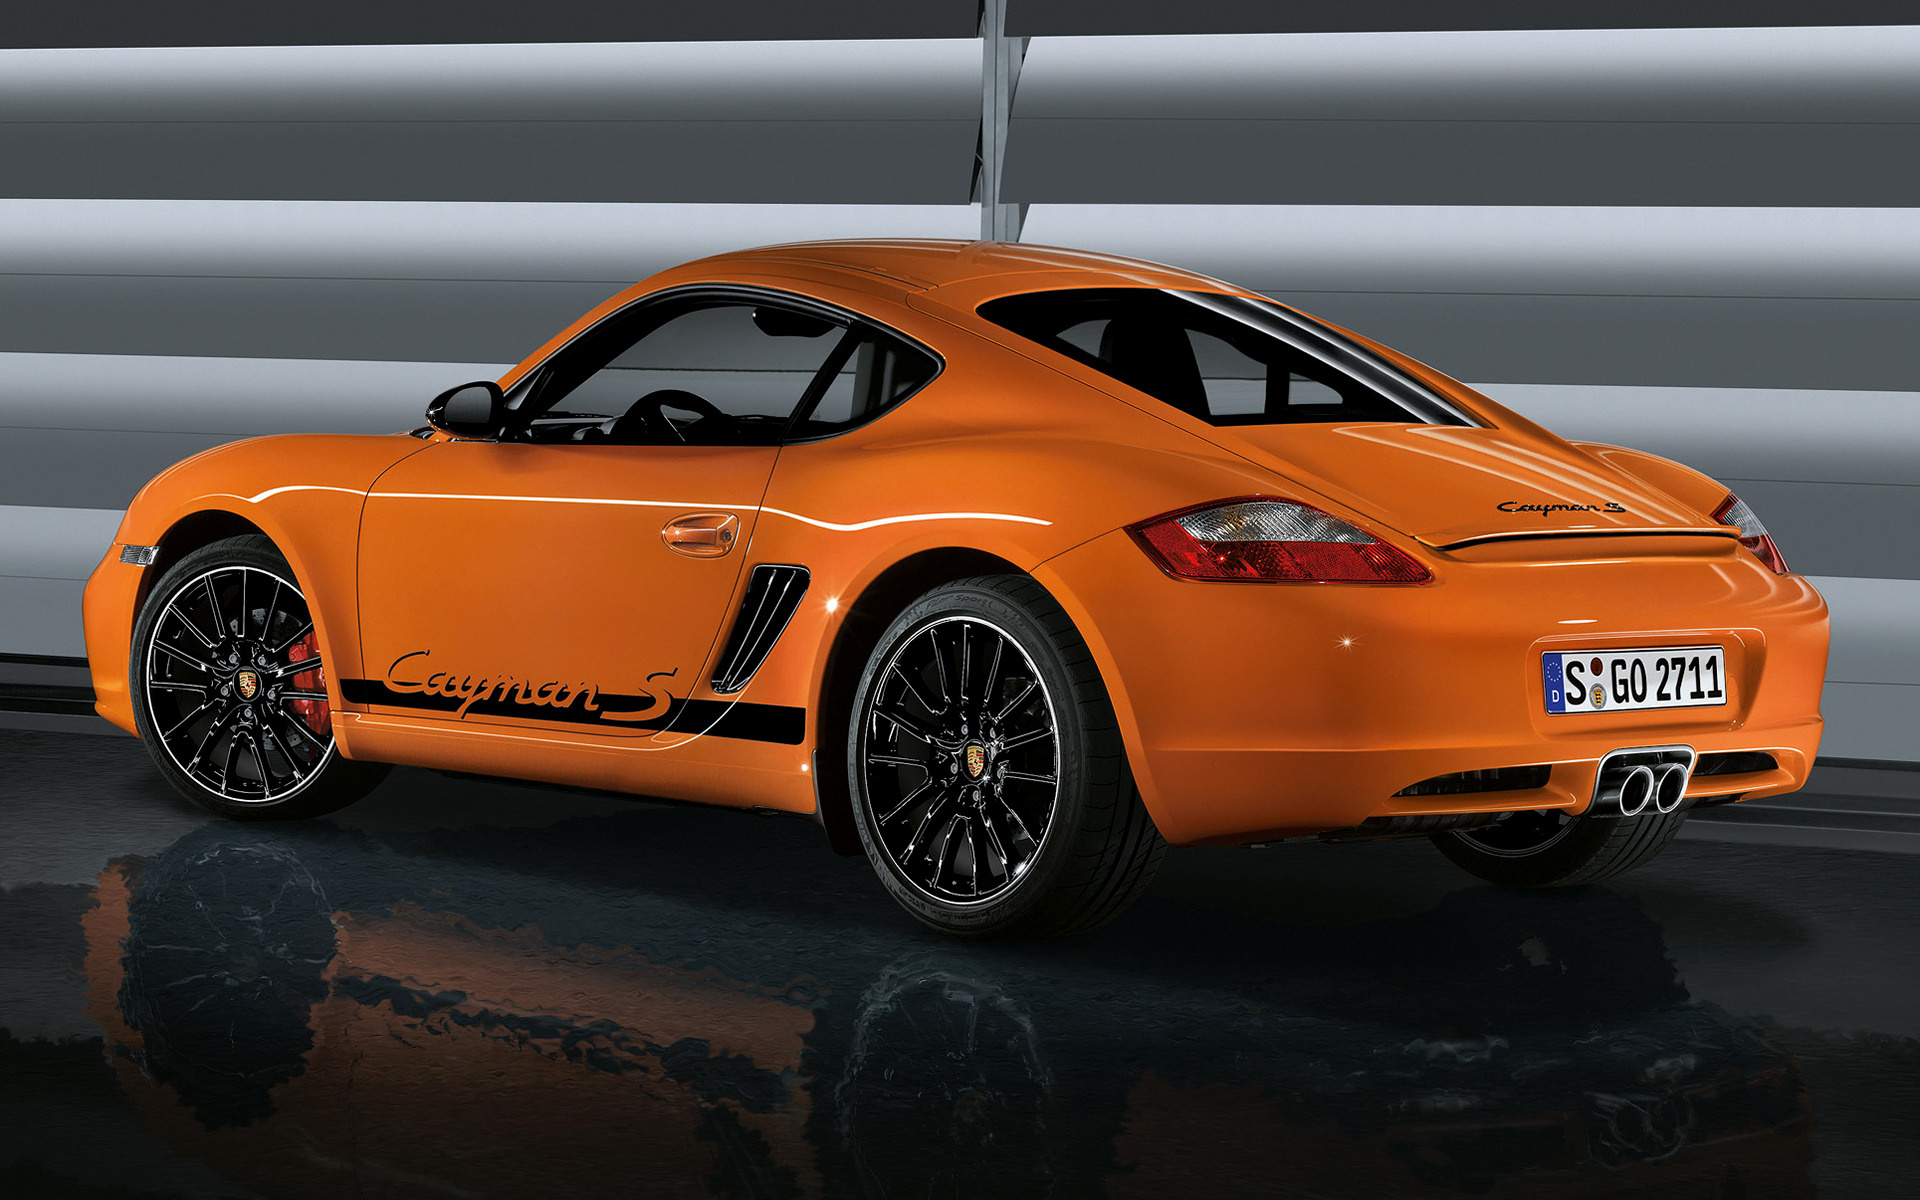 Porsche Cayman S Sport Limited Edition (2008) Wallpapers and HD Images ...